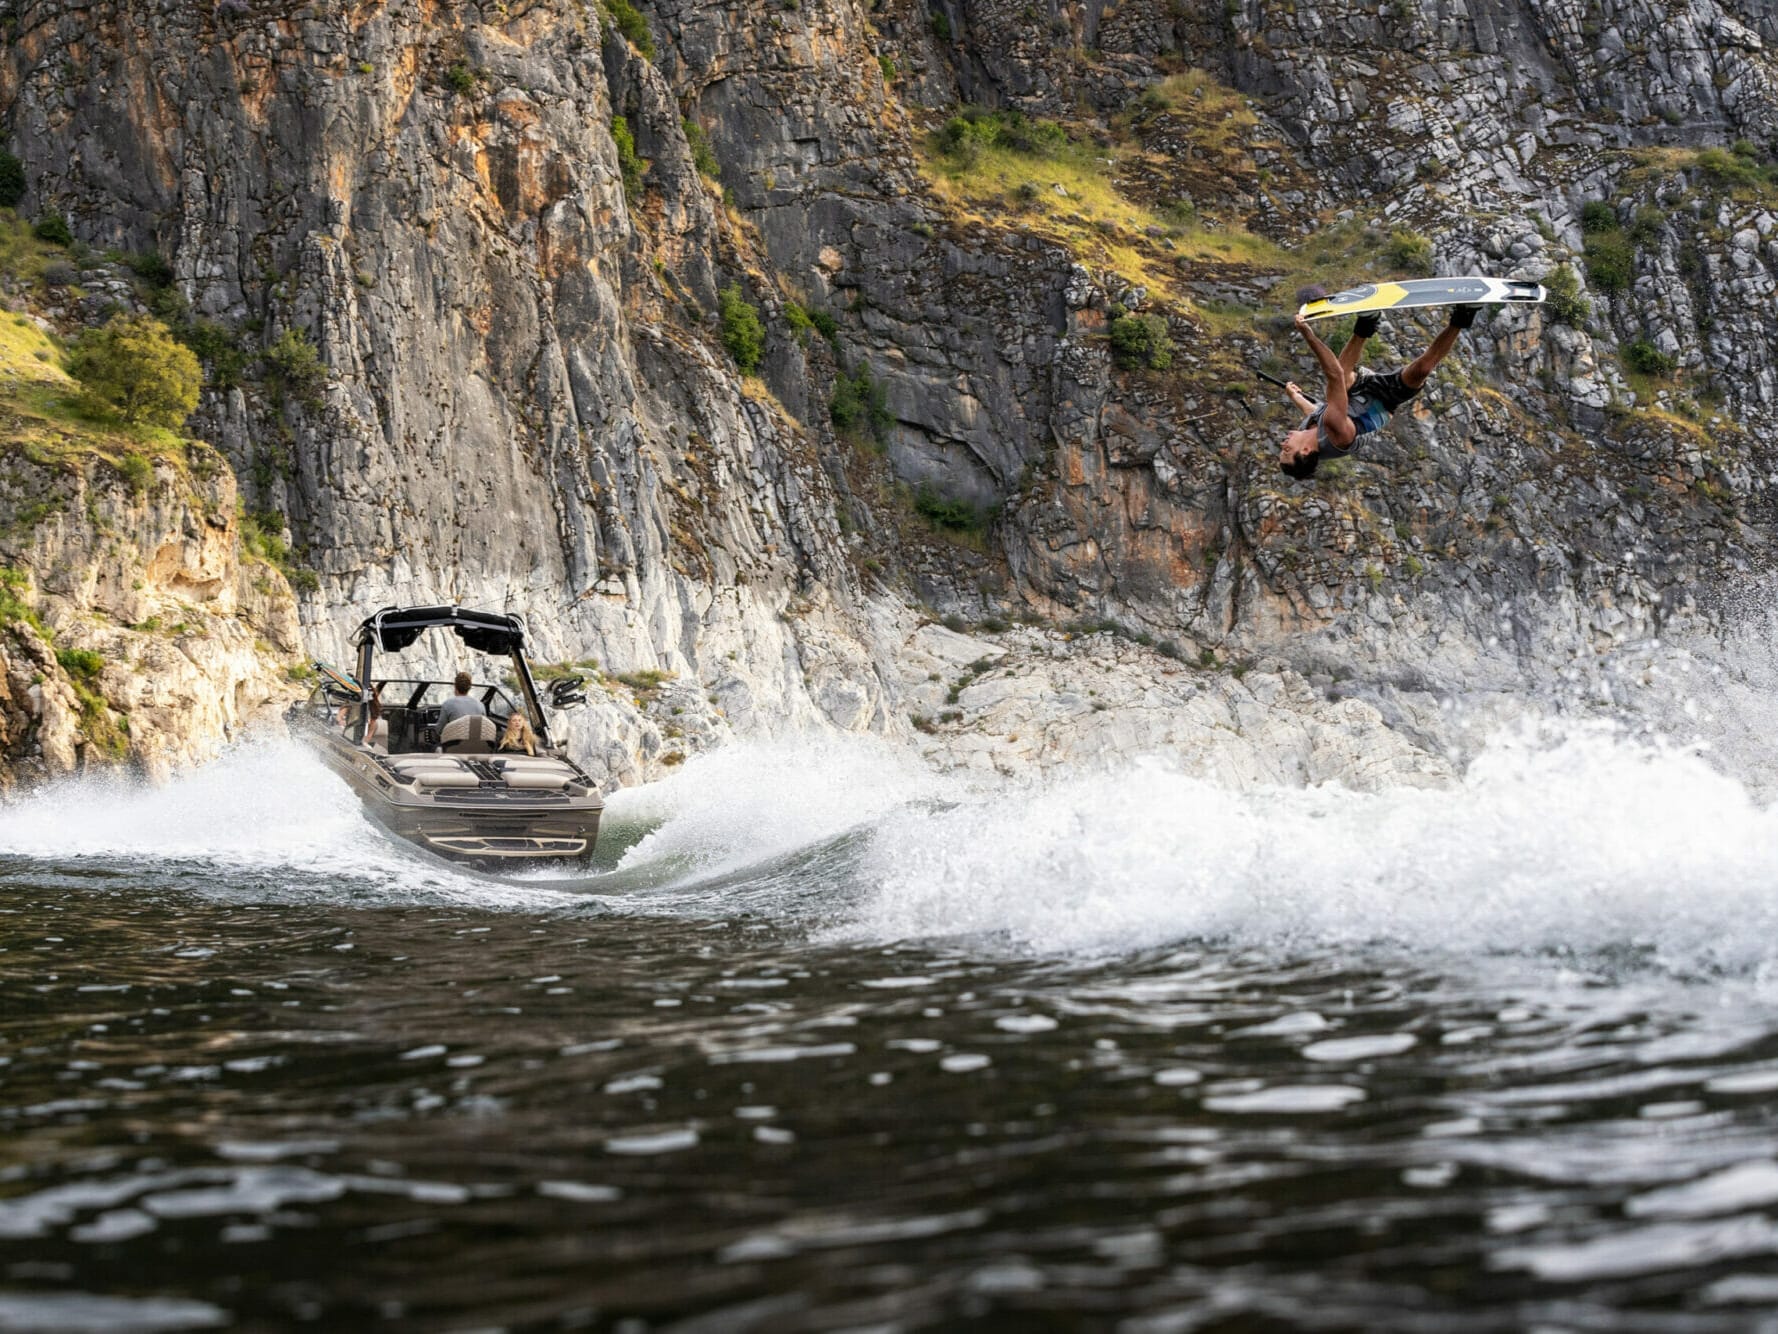 A man is riding a wakeboard over a wakeboat.